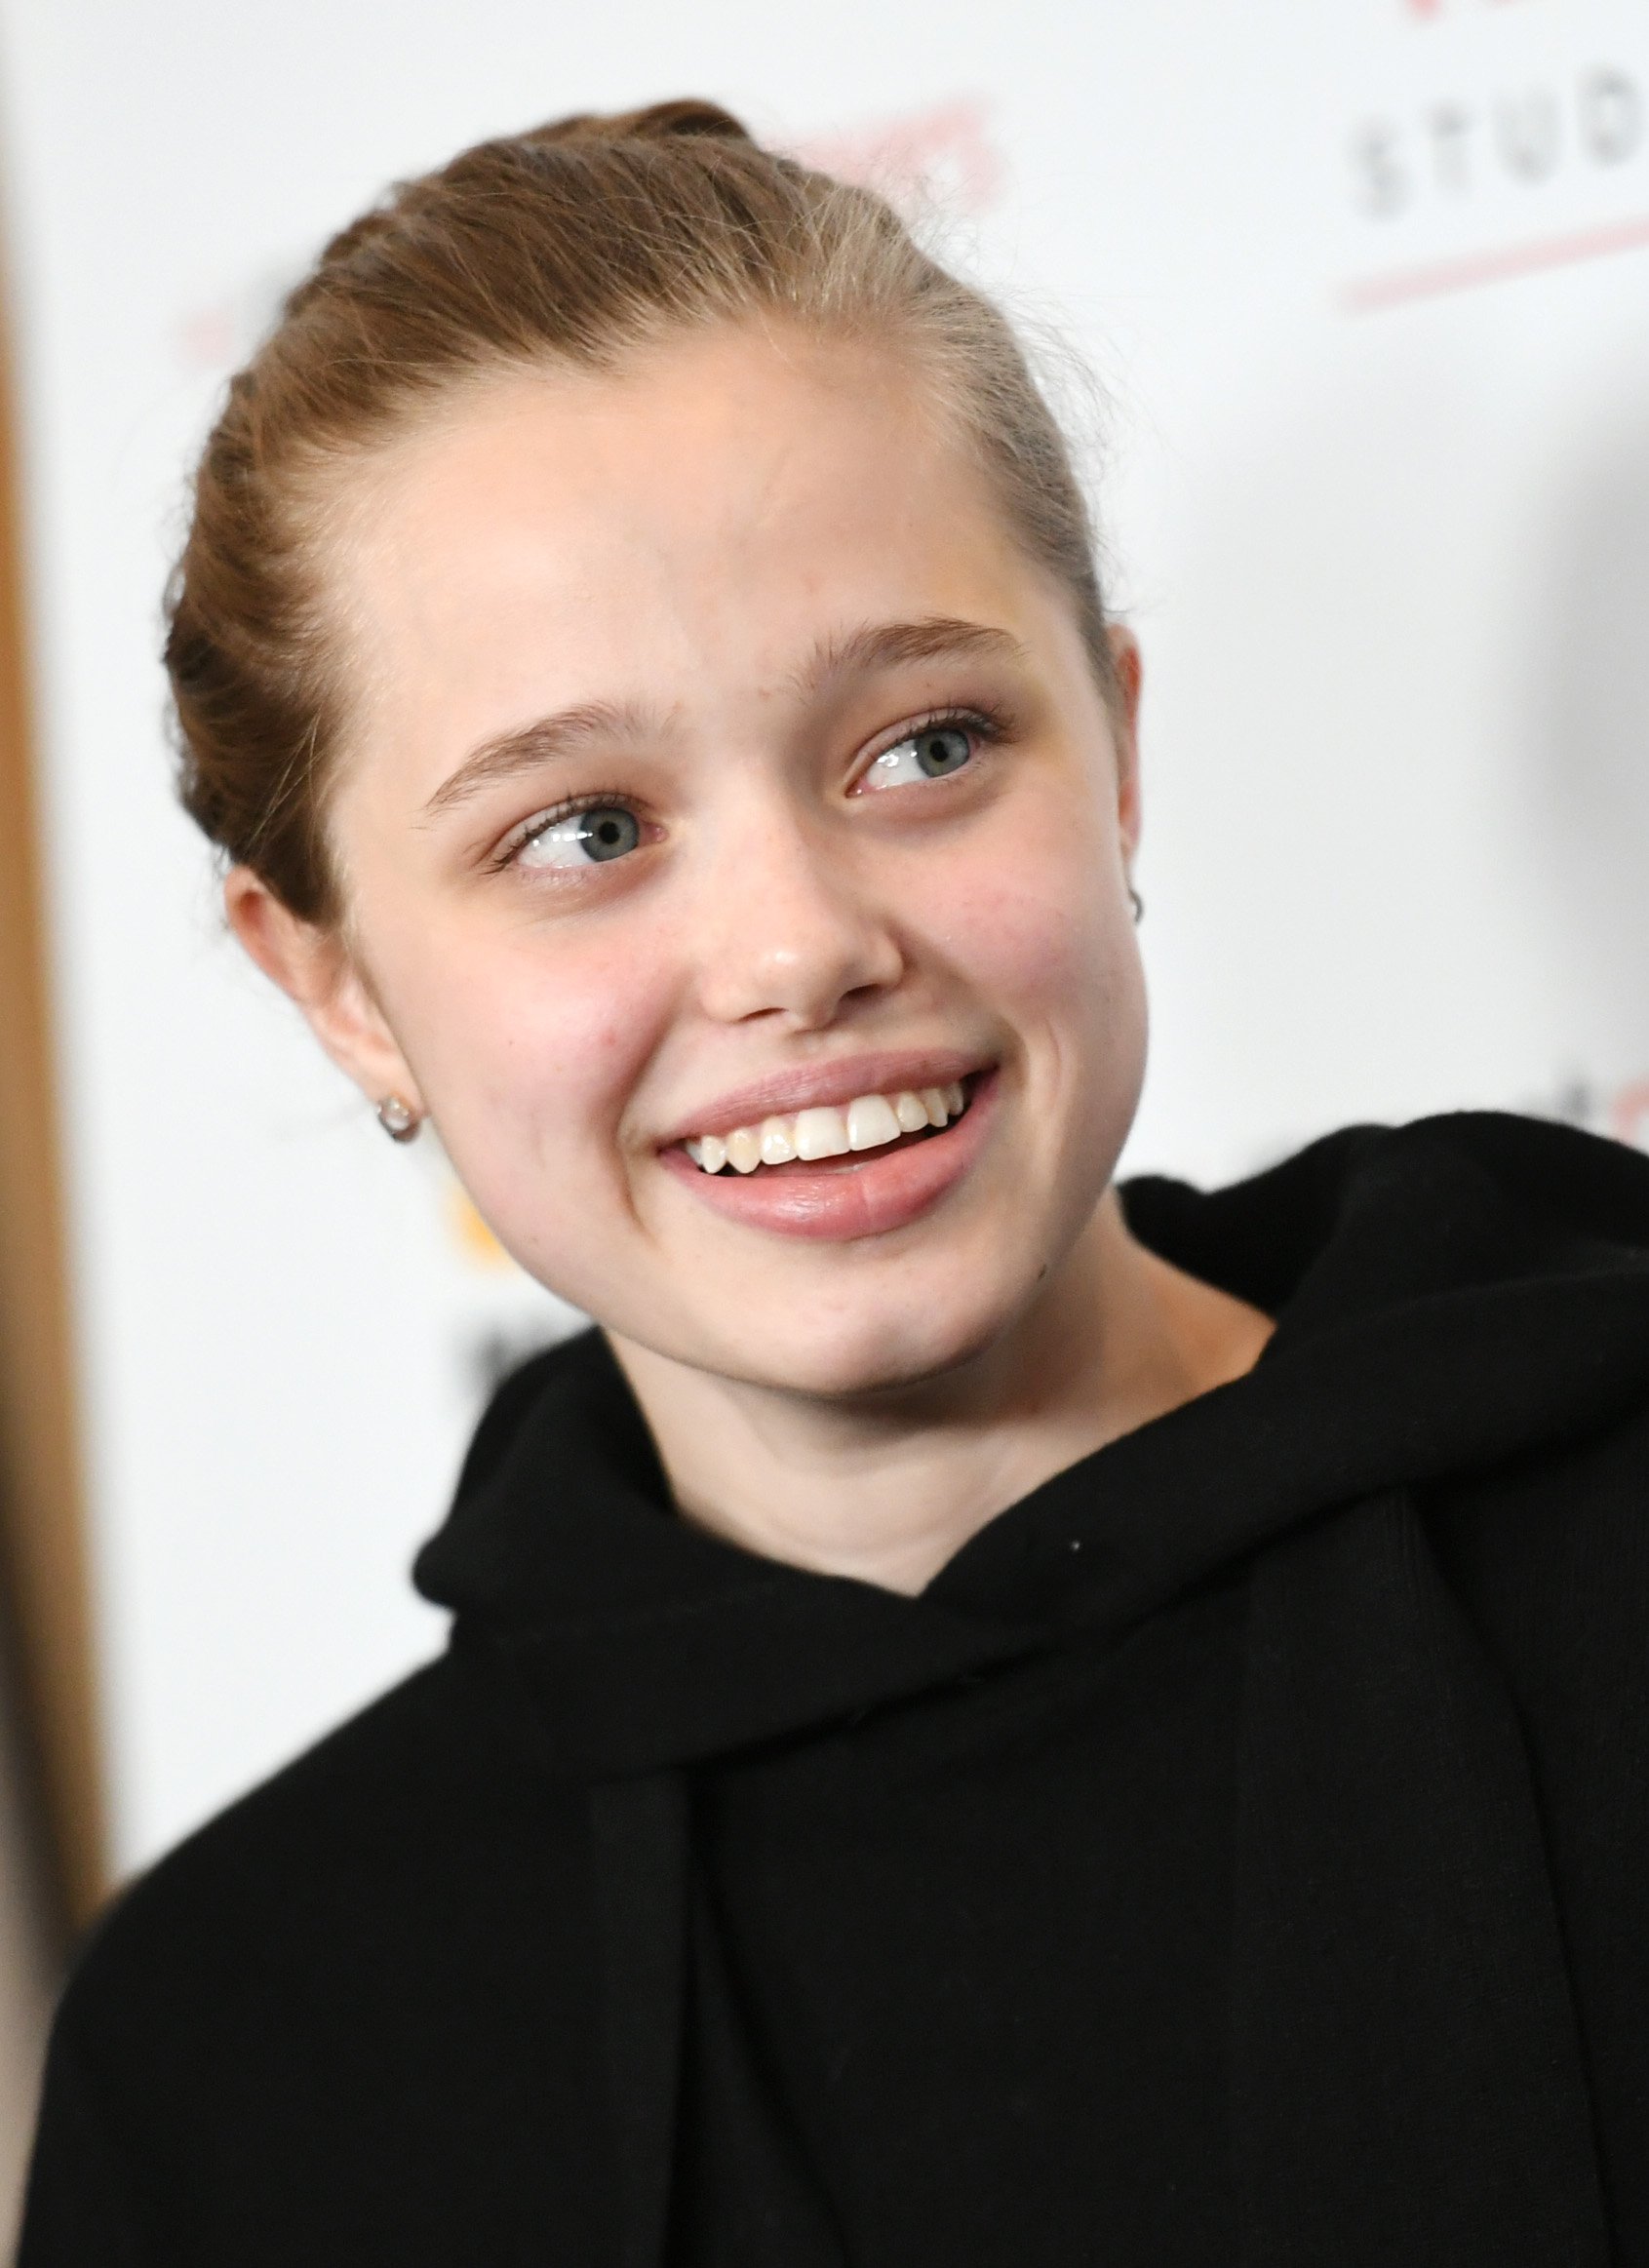 Shiloh Jolie-Pitt at\\u00a0the Los Angeles premiere of\\u00a0"Paper & Glue: A JR Project"\\u00a0on November 18, 2021, in Los Angeles, California | Source: Getty Images